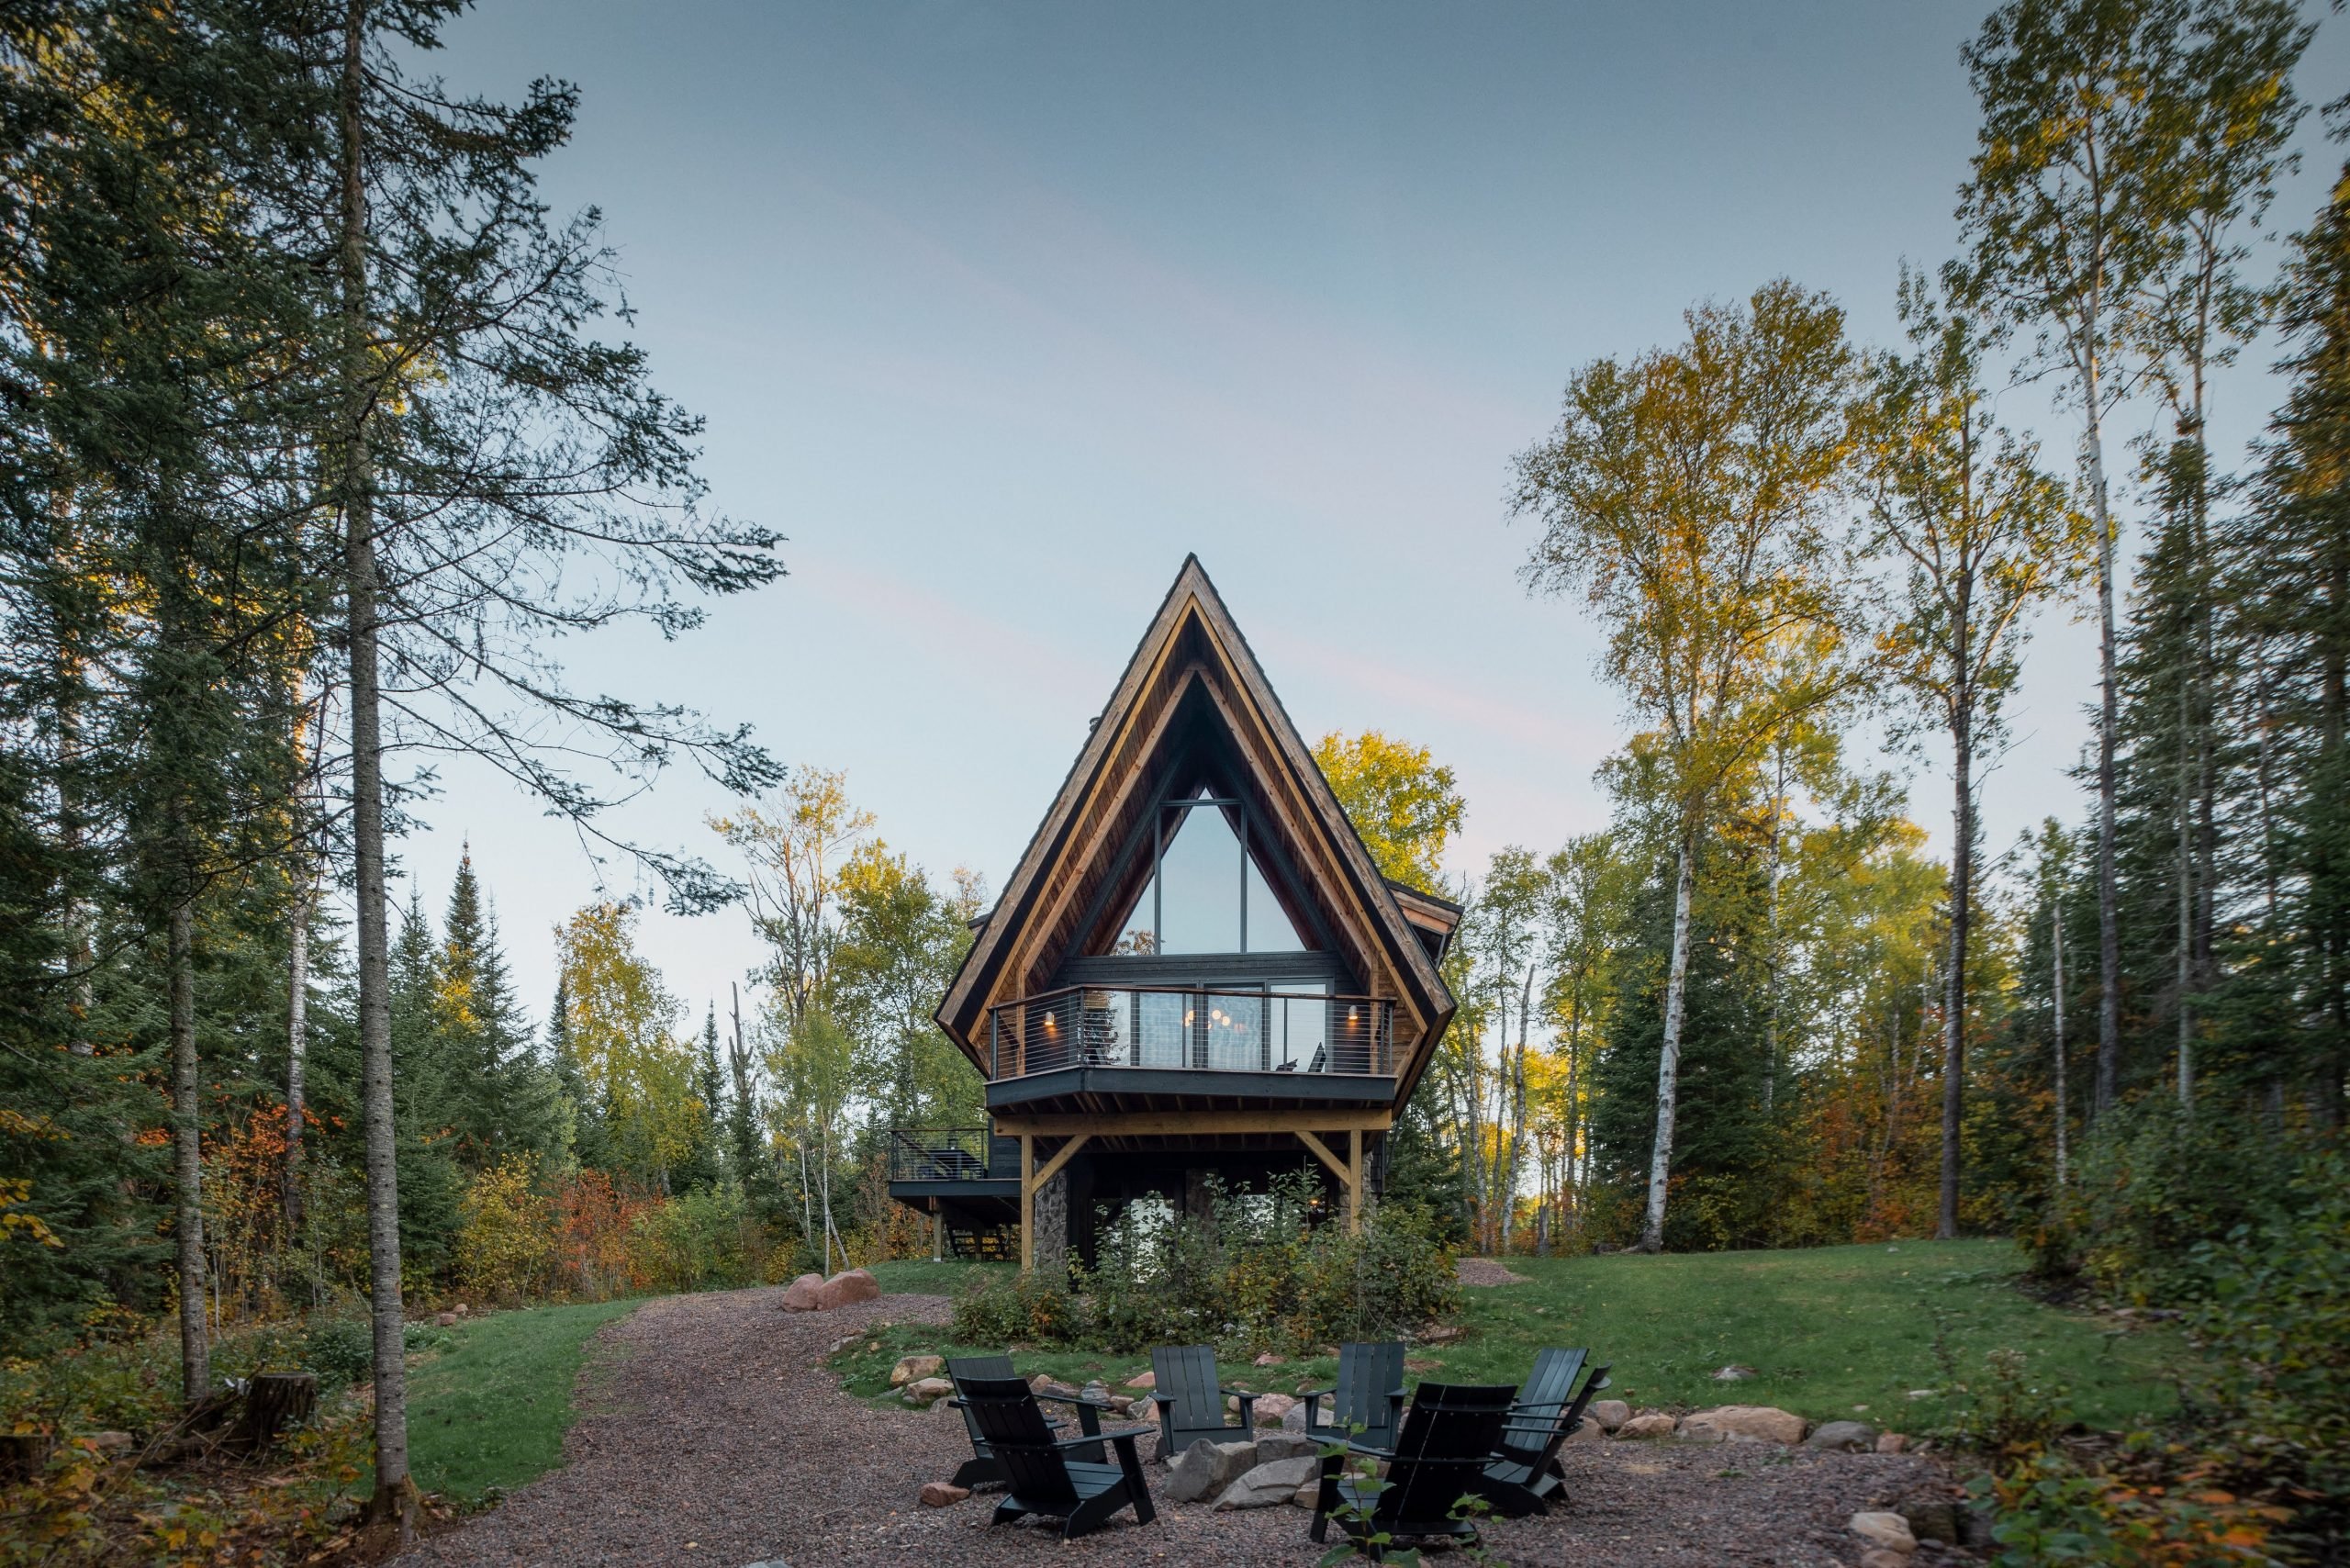 The Minne Stuga Cabin featuring kebony modified wood siding in Grand Marais Minnesota surrounded by a wooded area in the early morning